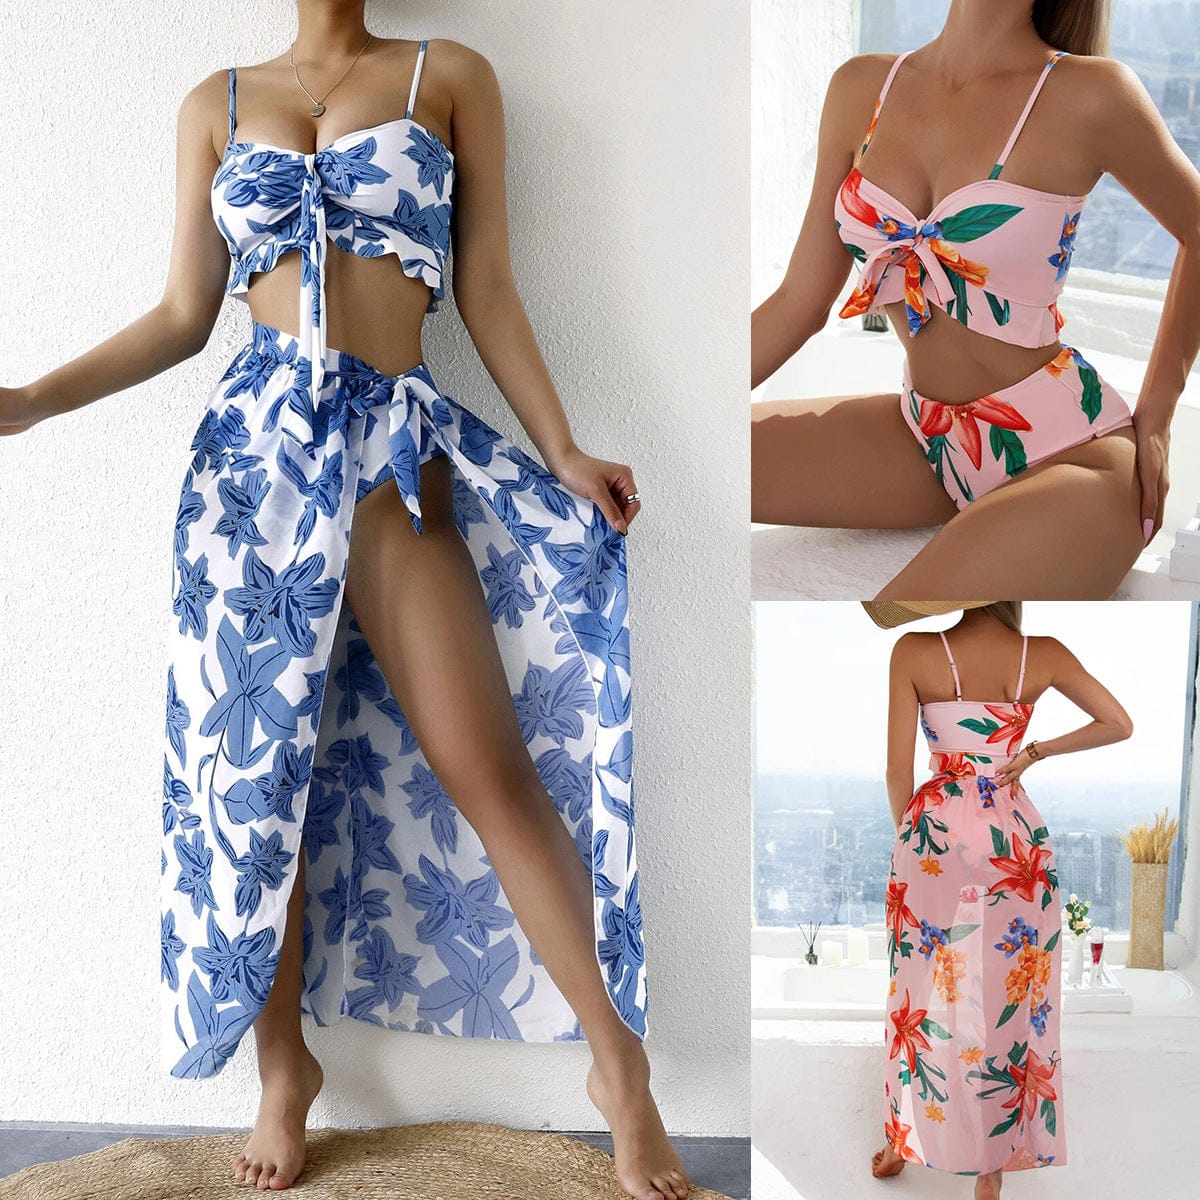 Herrnalise Womens Swimsuits Two PieceHigh Cut Conservative Print